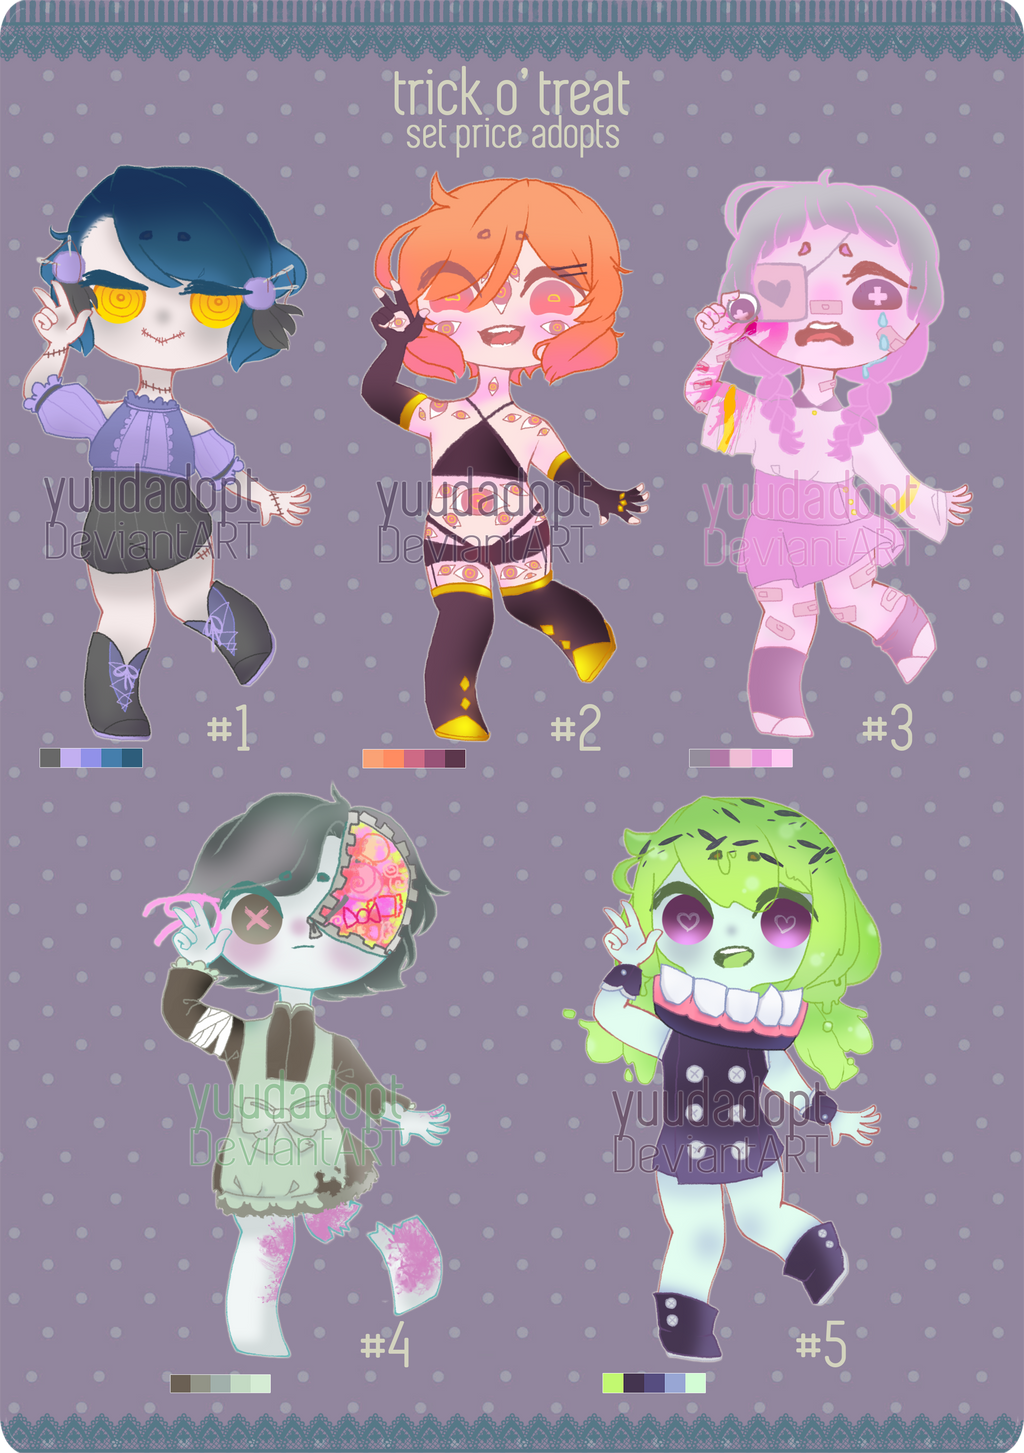 (4/5 OPEN) Trick o' Treat Adopts $6 EACH